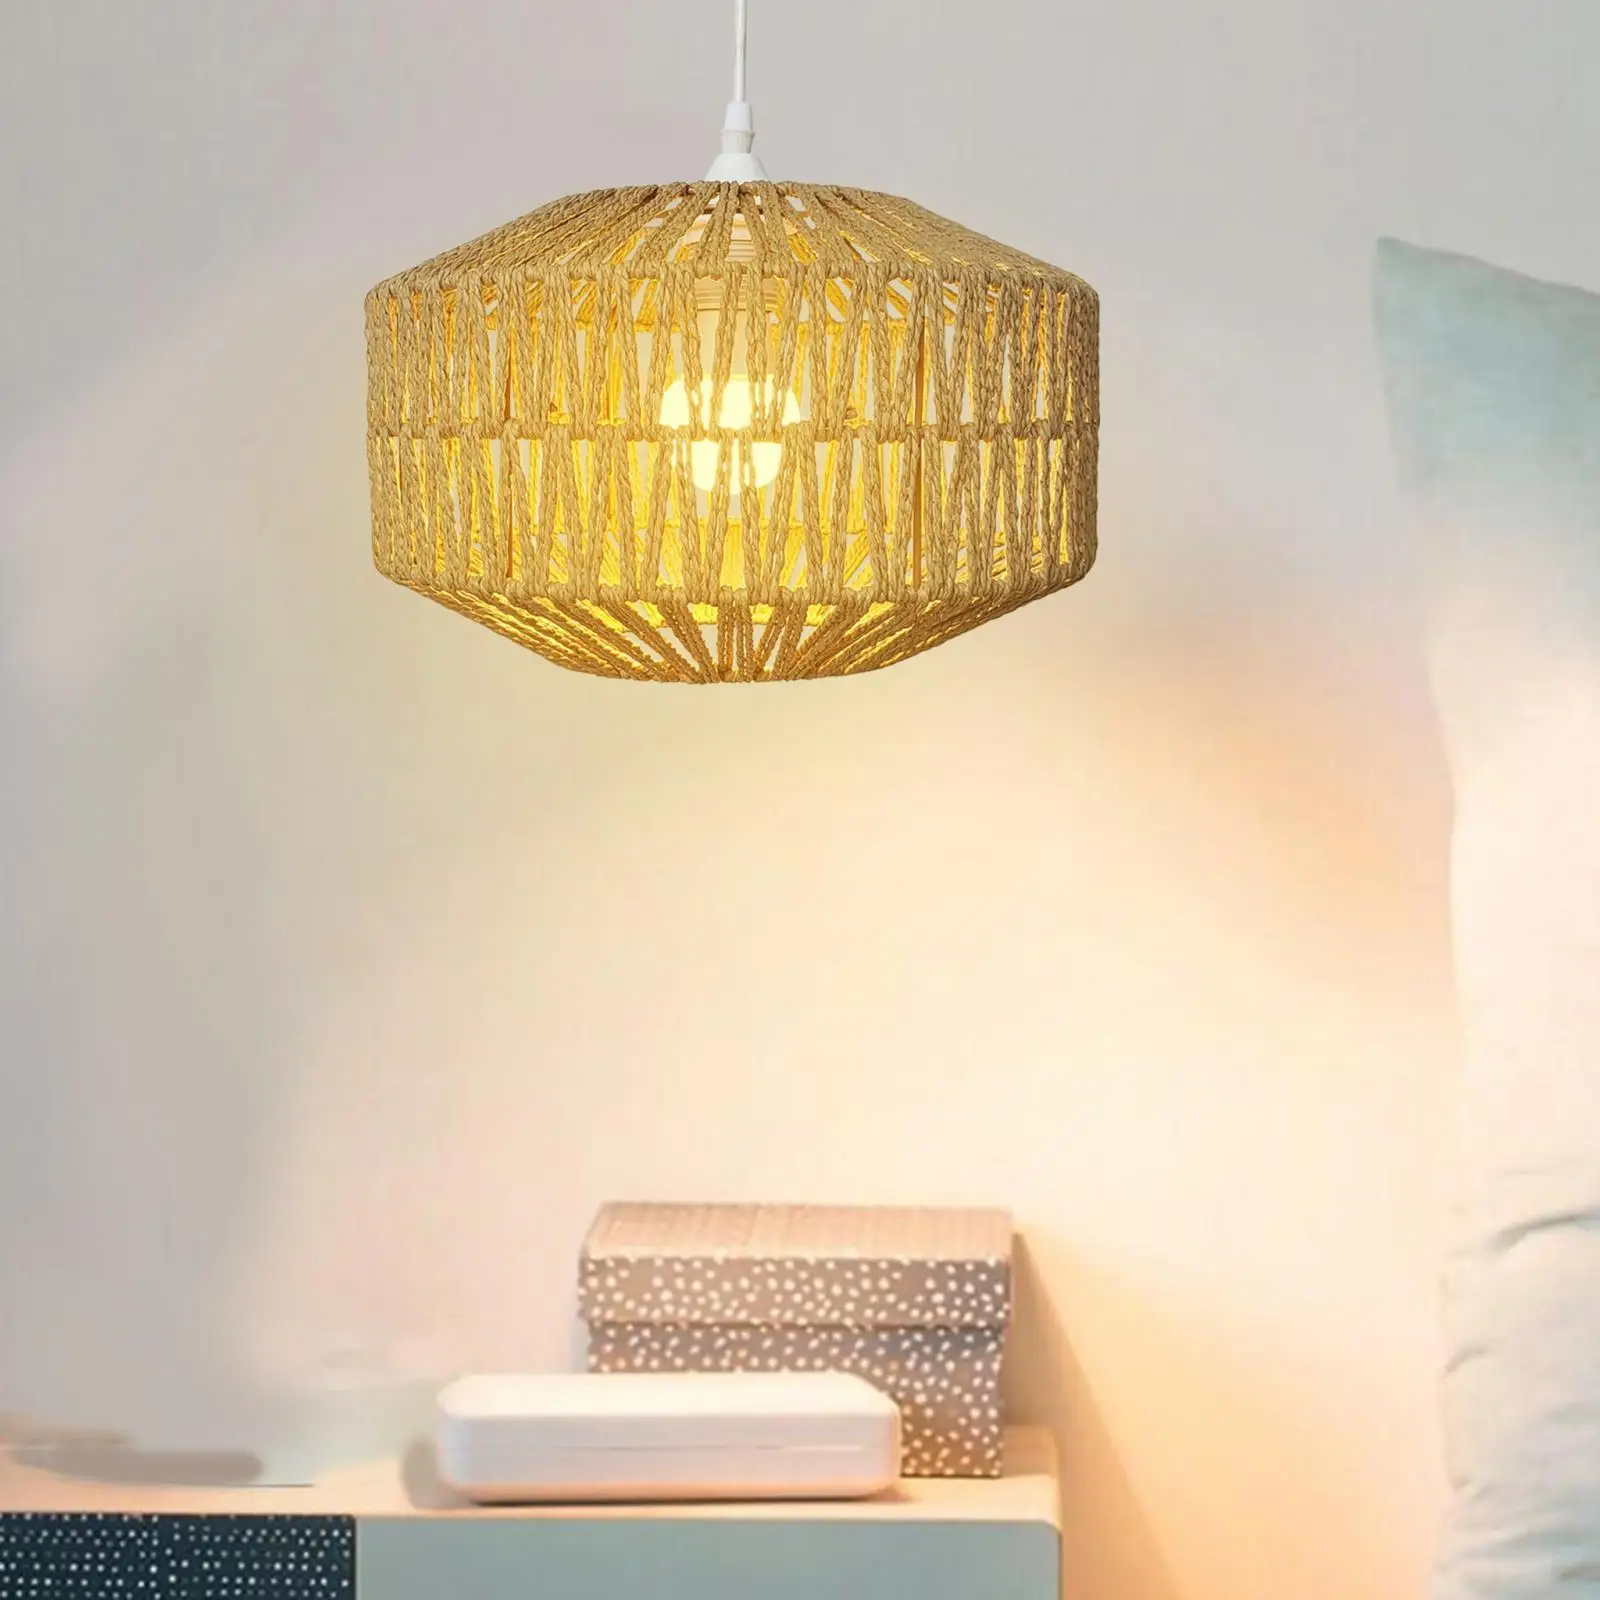 Woven Rope Lampshade Floor Lamp Chandelier Decoration Rustic Decorative Living Room Fitting Table Lamp Home Pendant Light Cover